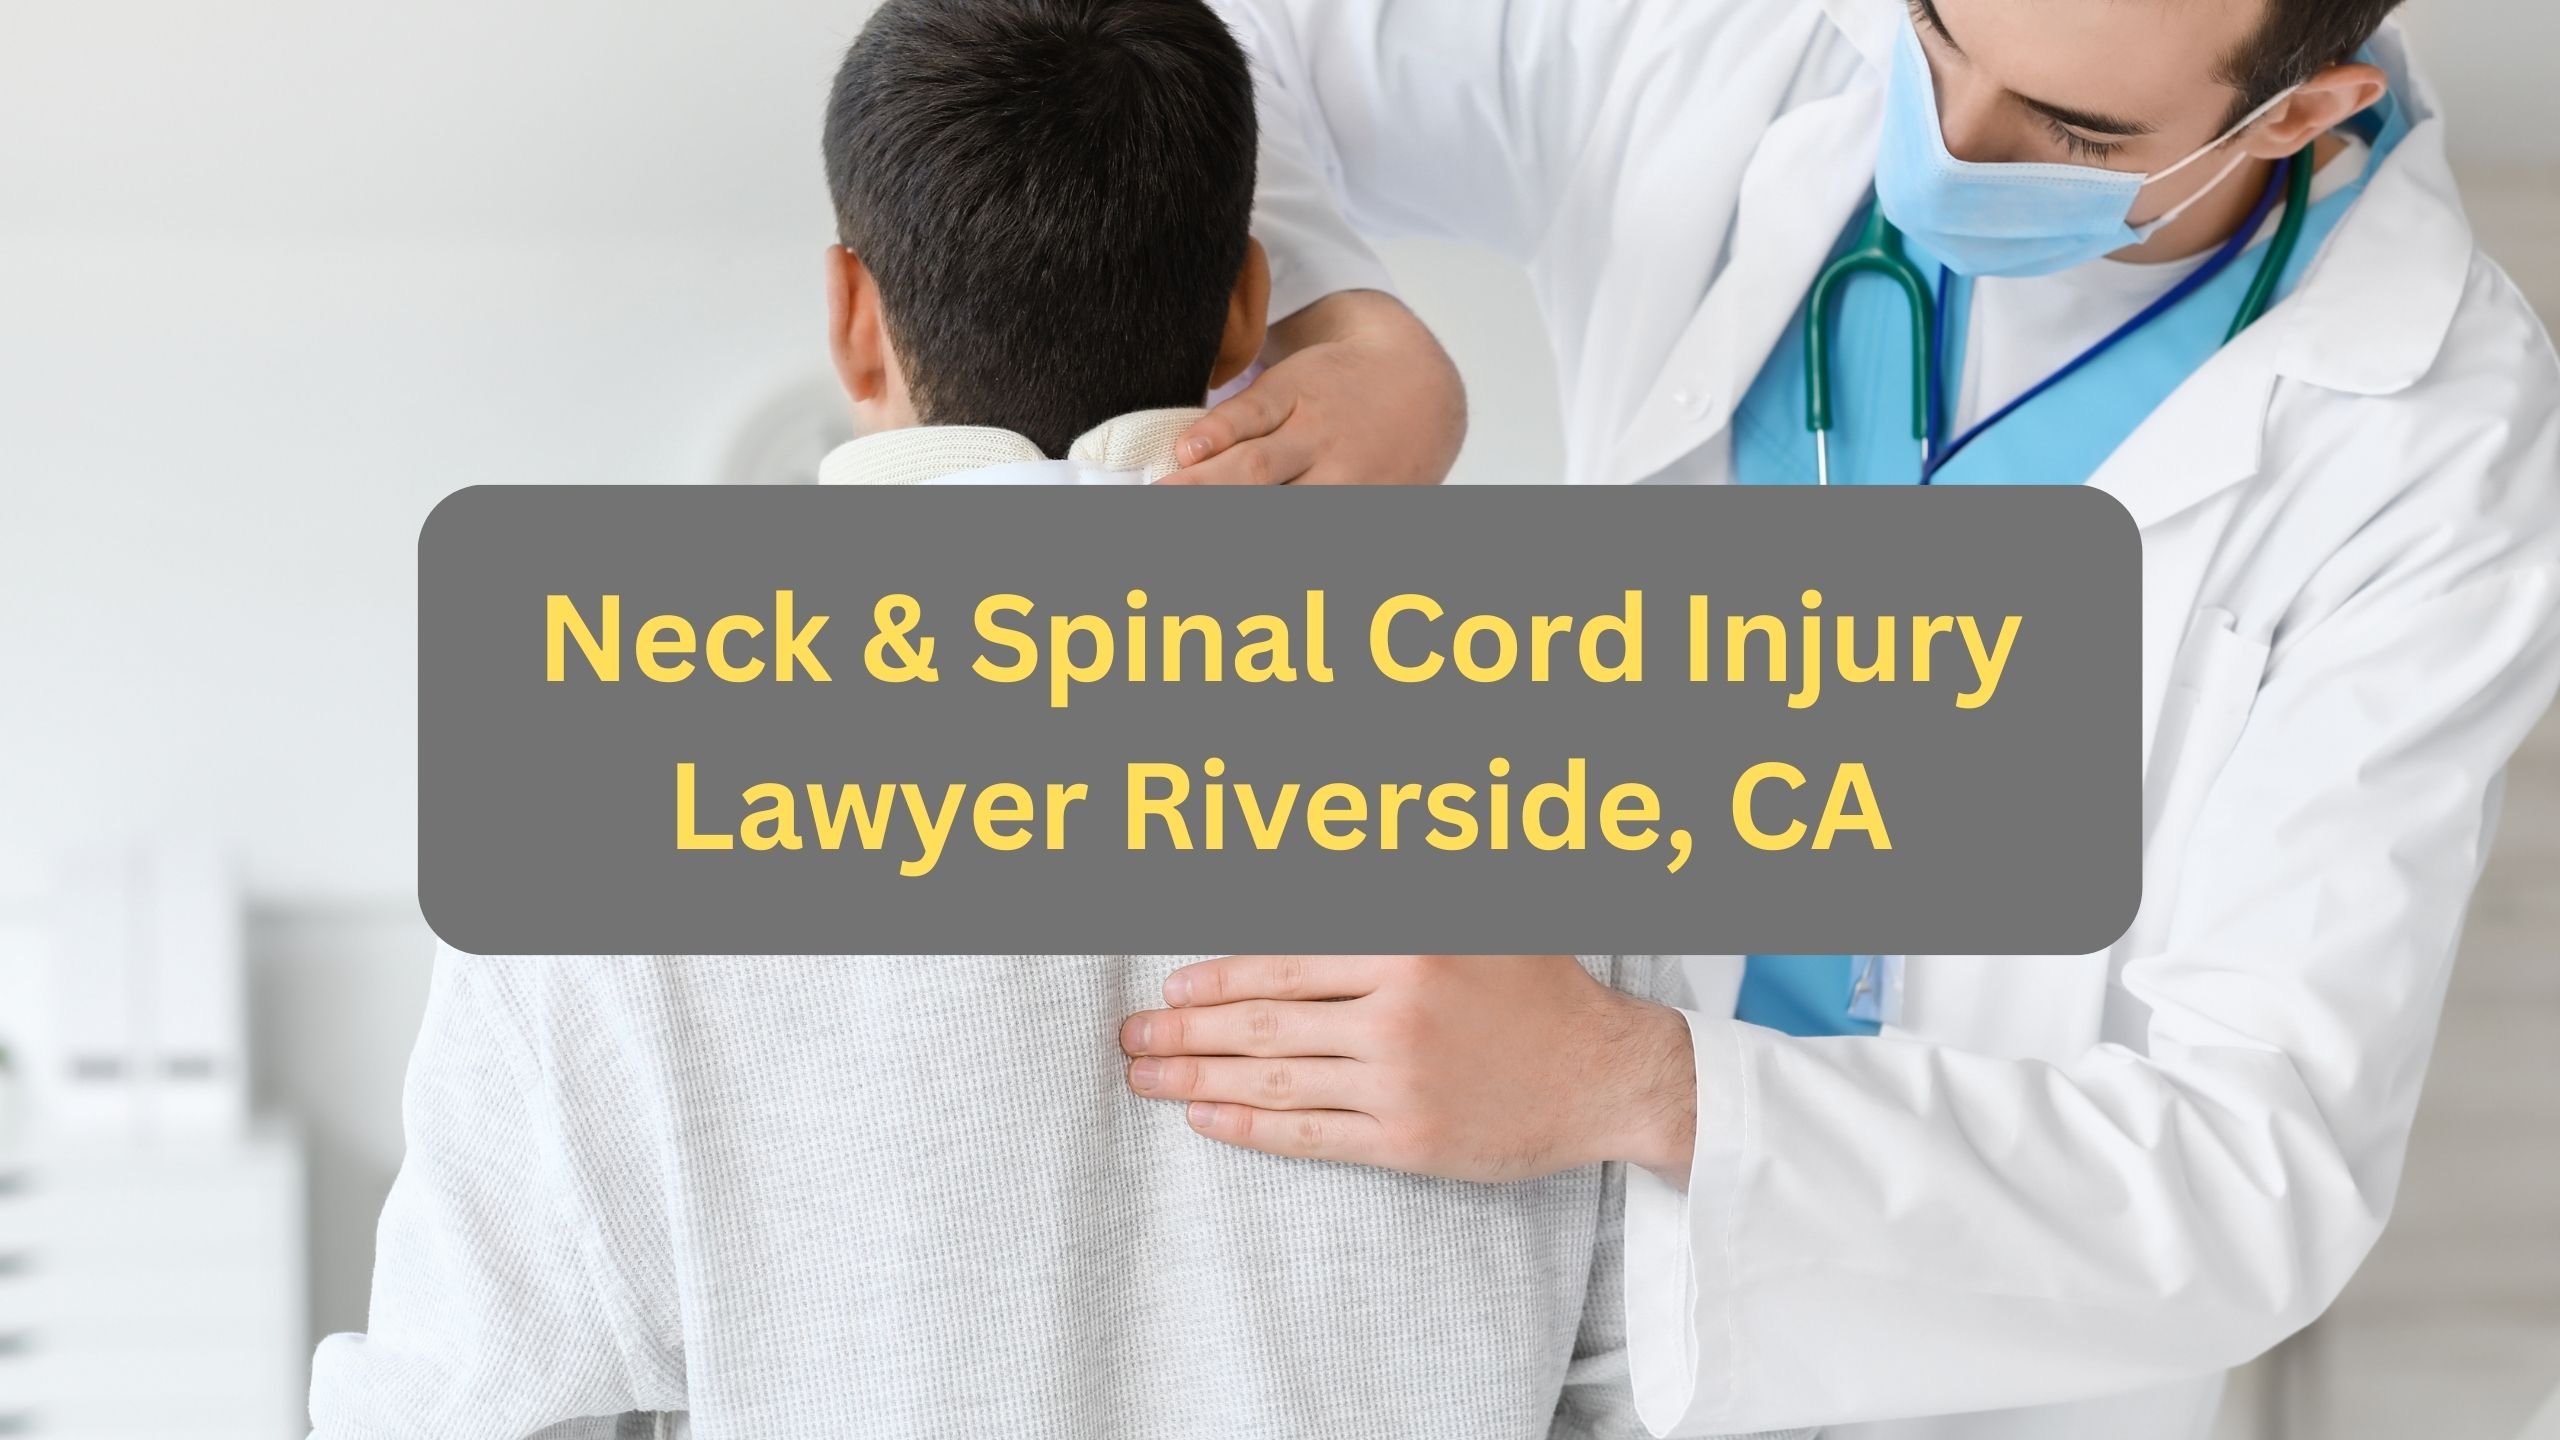 Neck & Spinal Cord Injury Lawyer